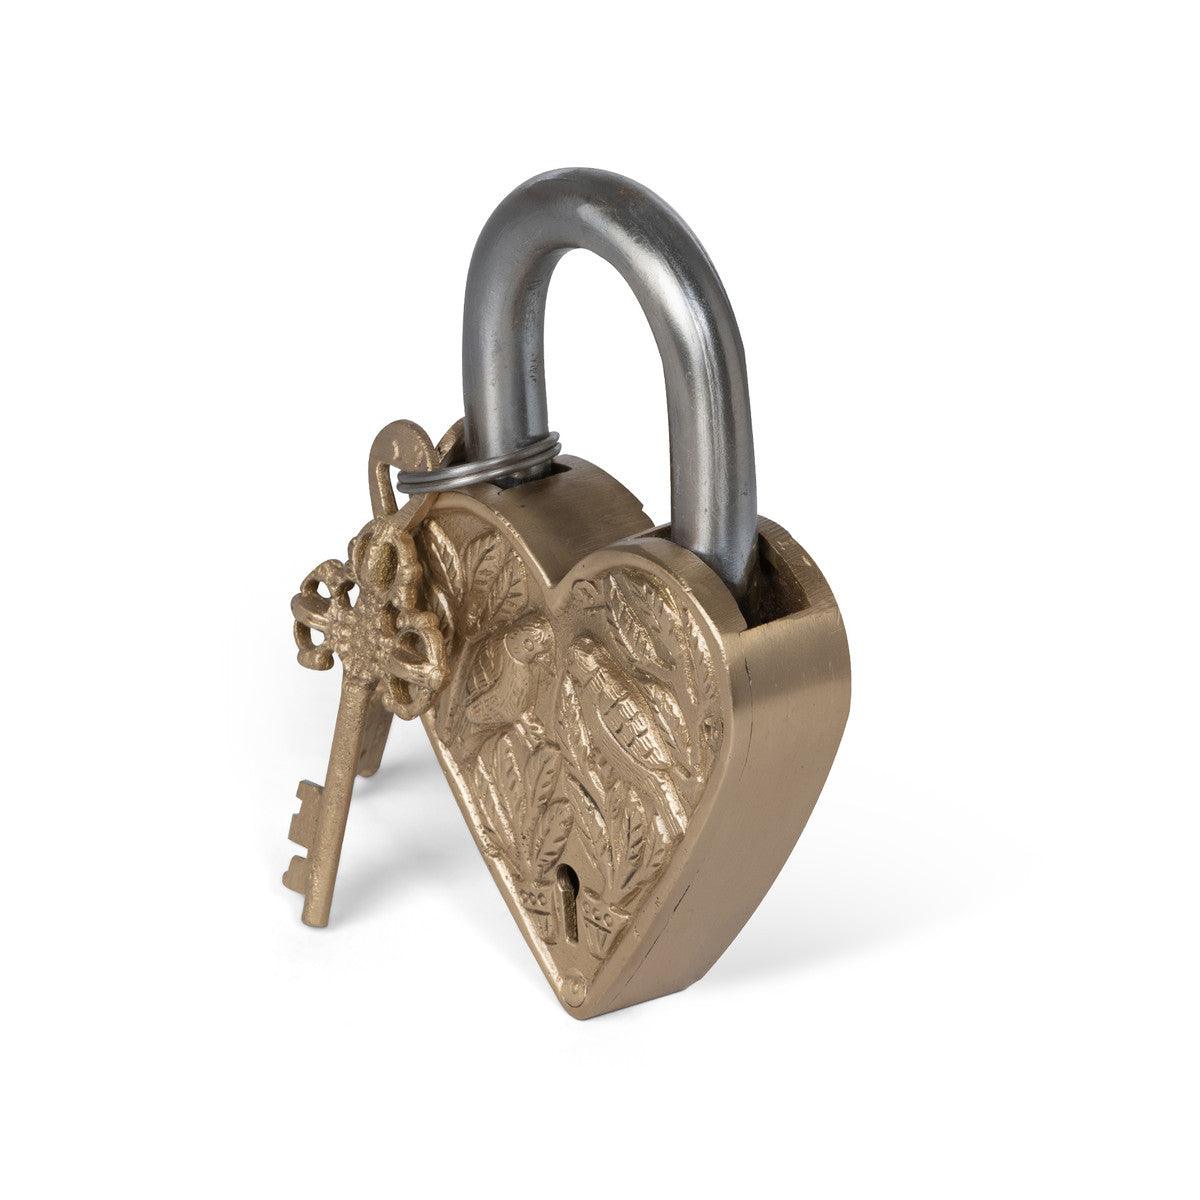 Heart Shaped Love Lock - Signastyle Boutique